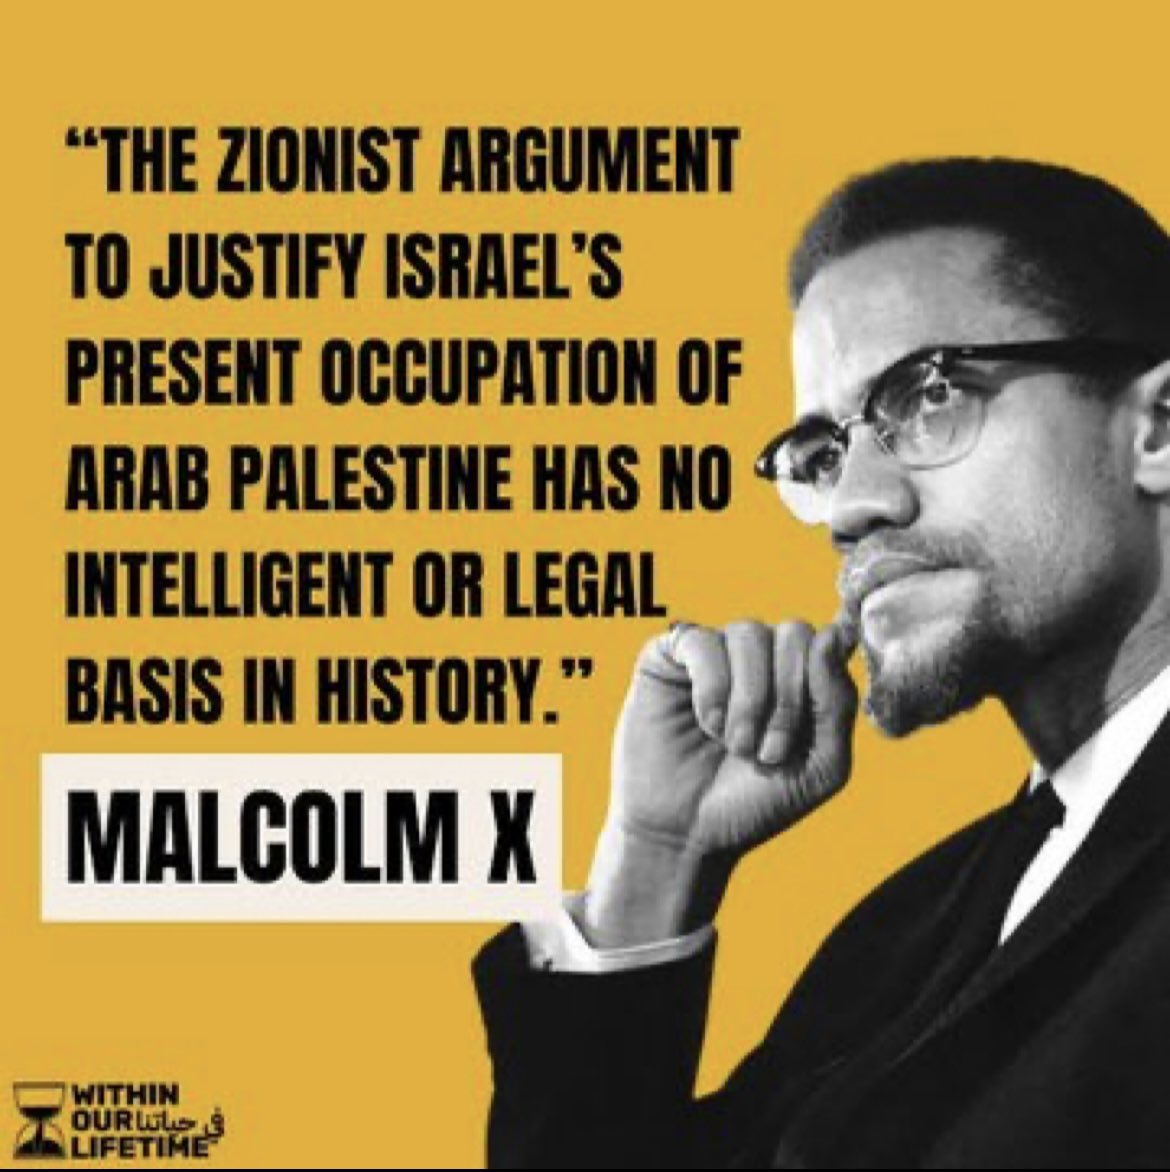 They killed Malcolm after he visited Palestine and saw the injustice